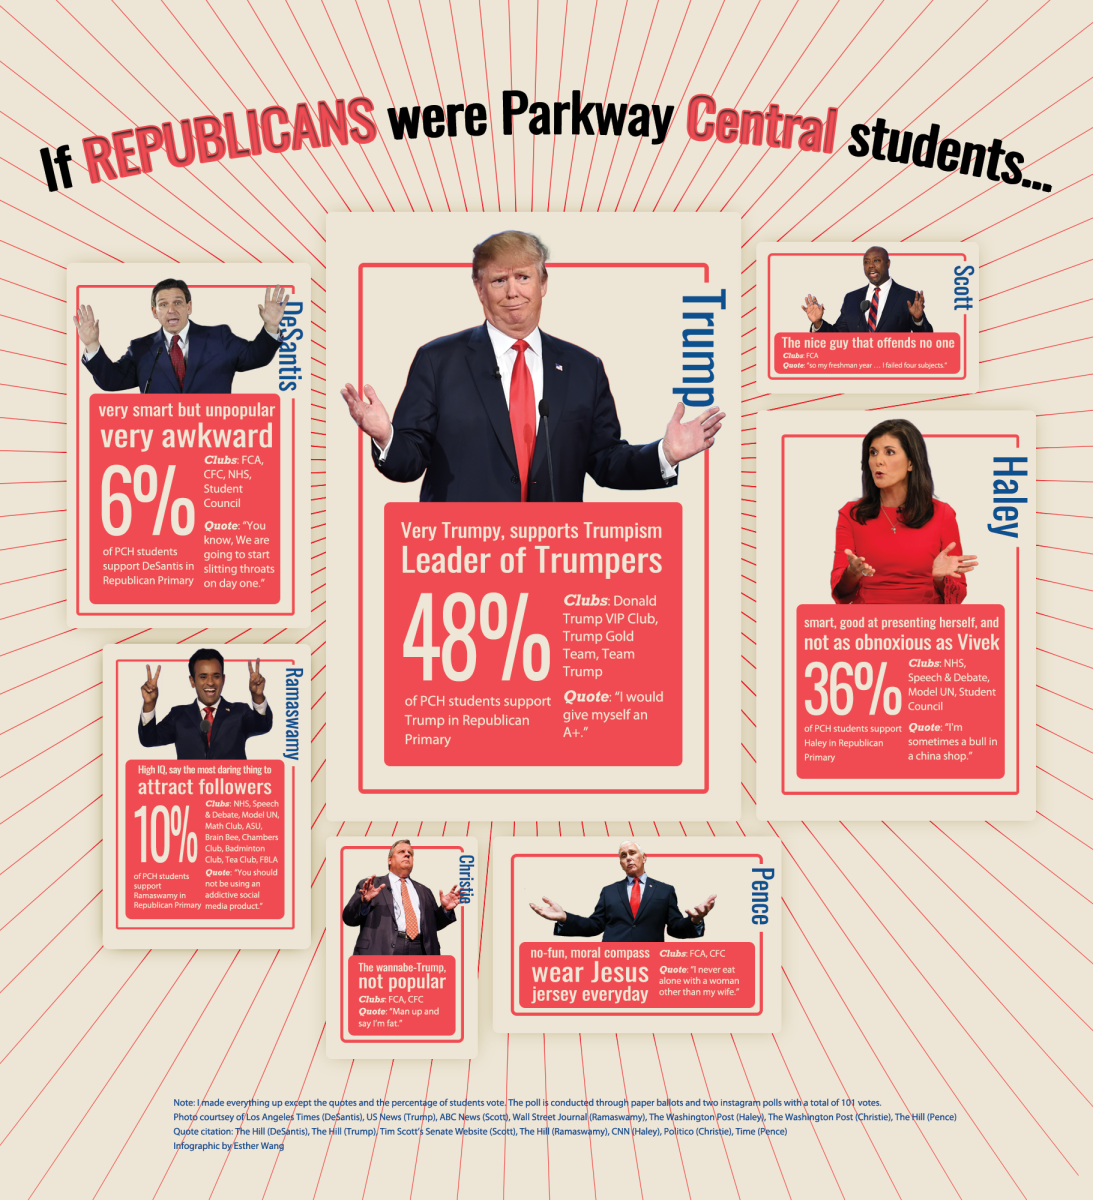 If Republicans were Parkway Central Students...